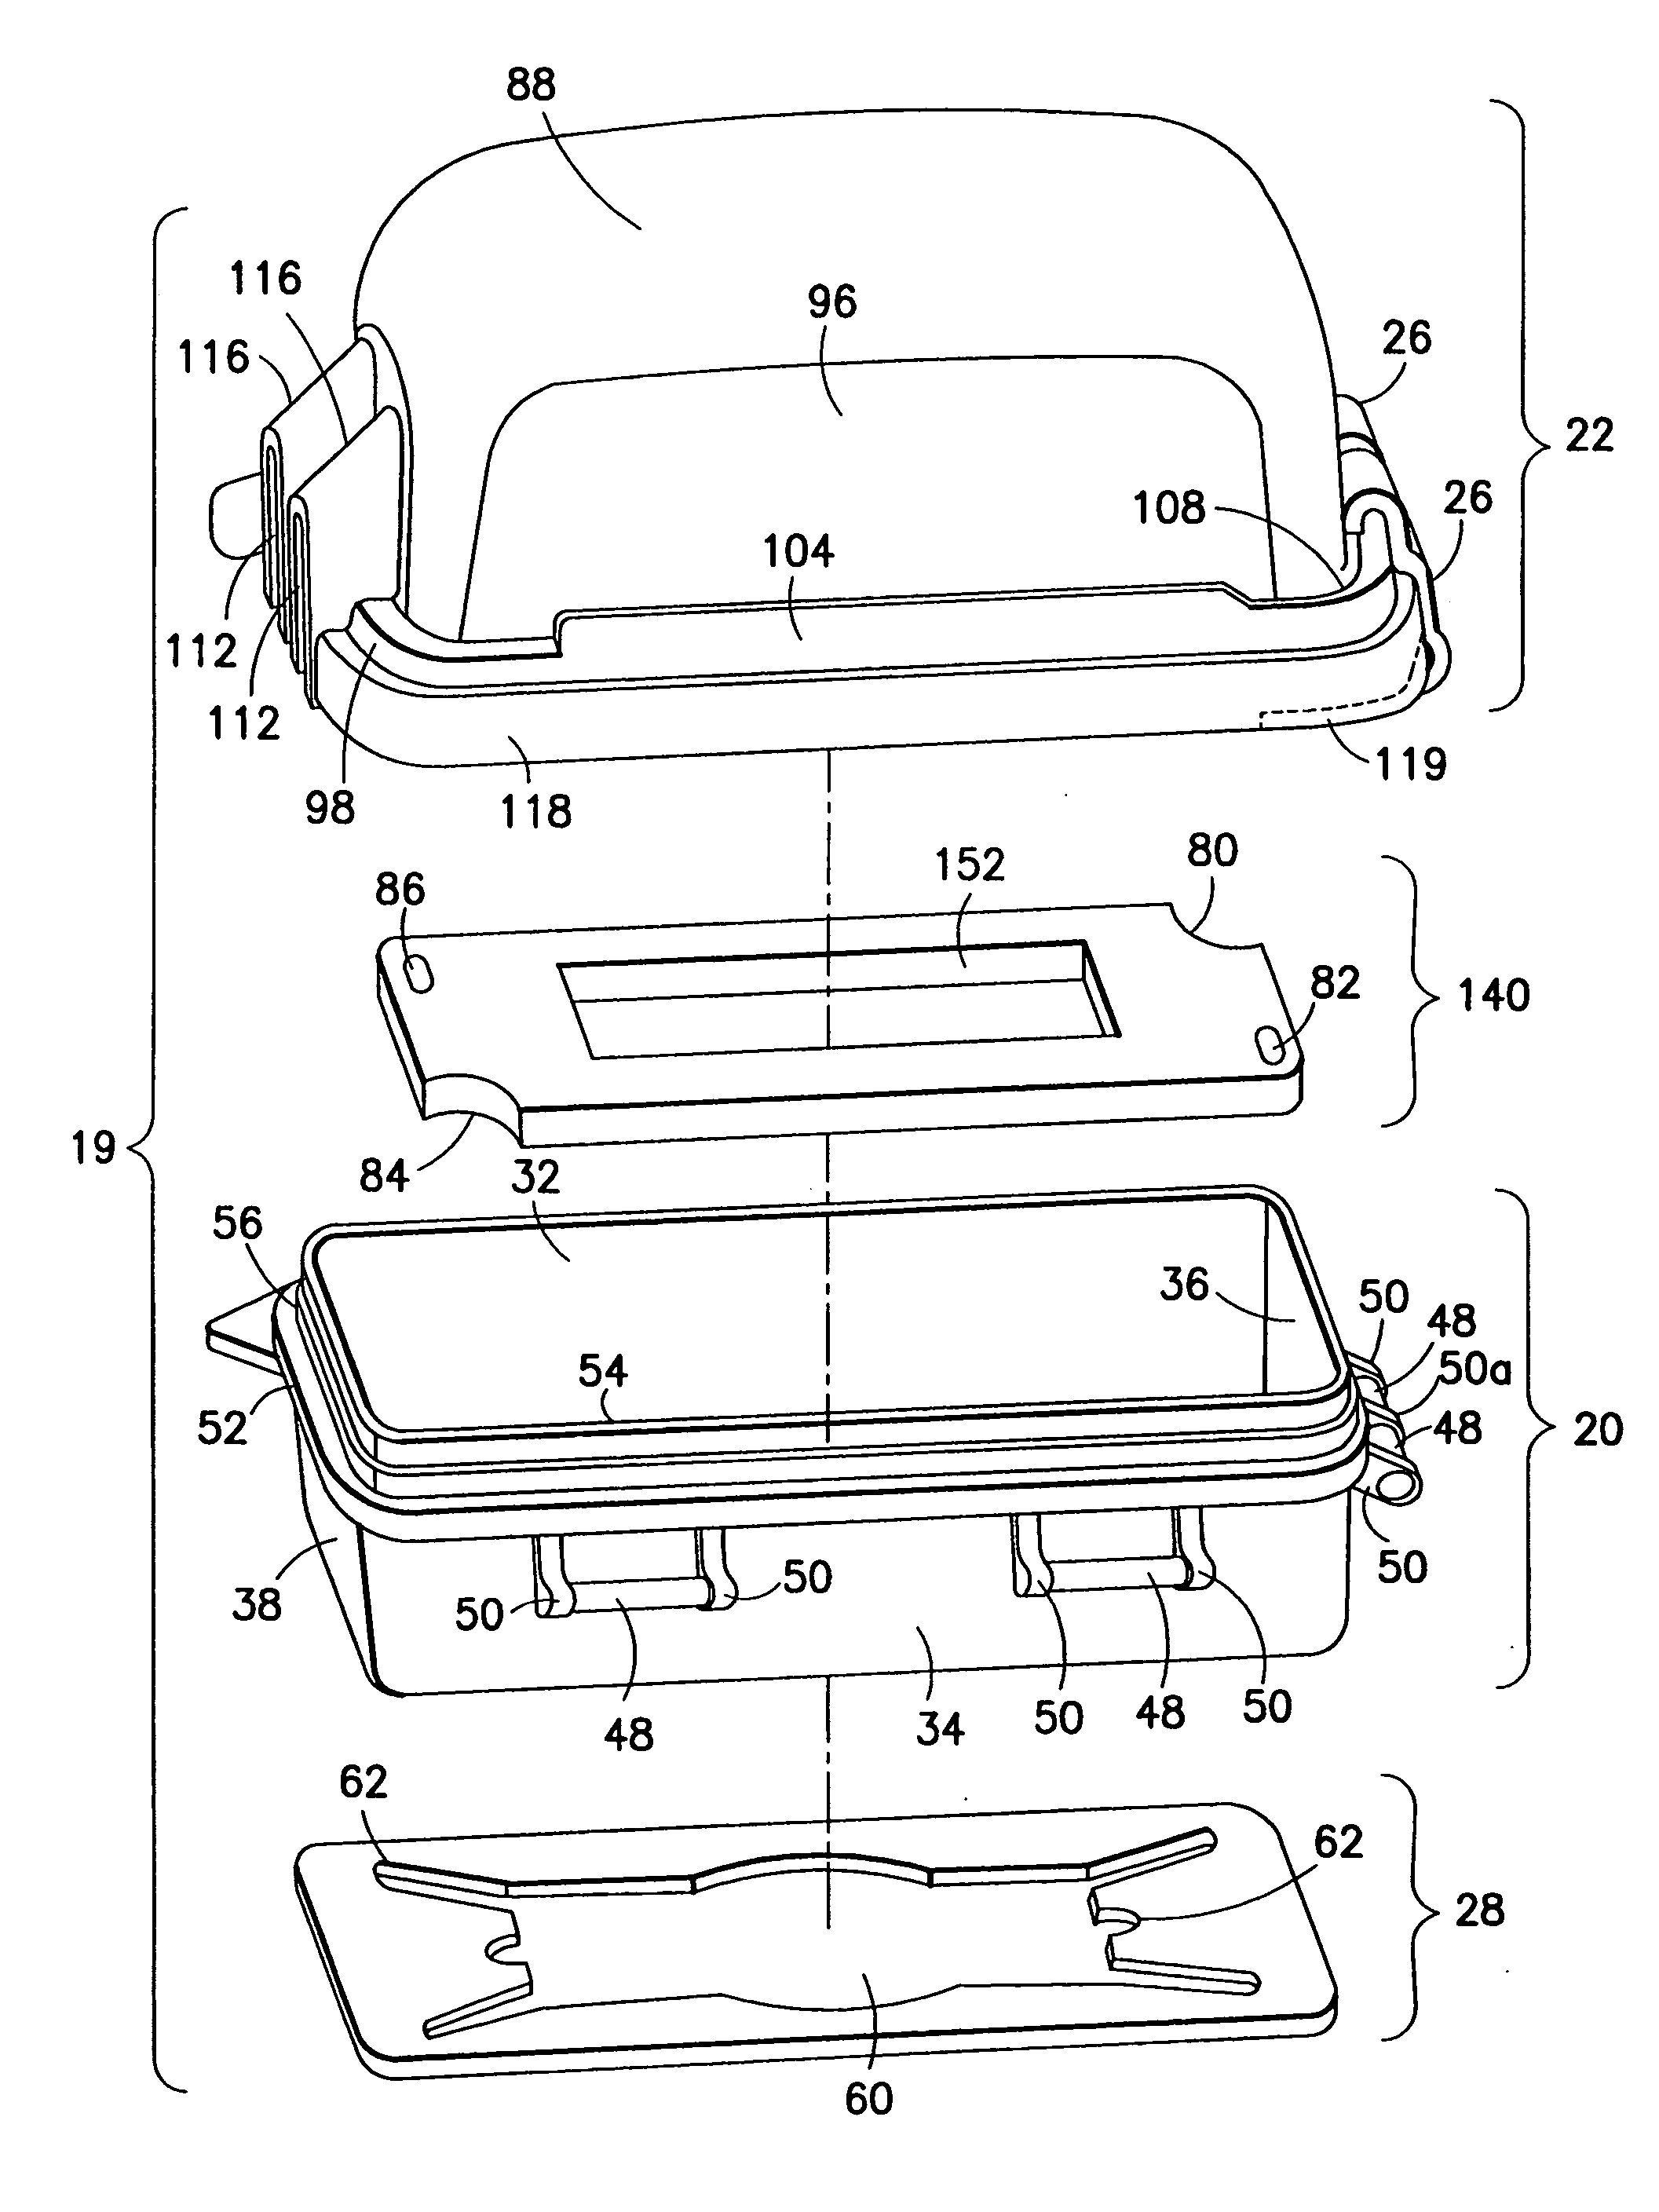 Weatherproof electrical enclosure having an adjustable-position cover